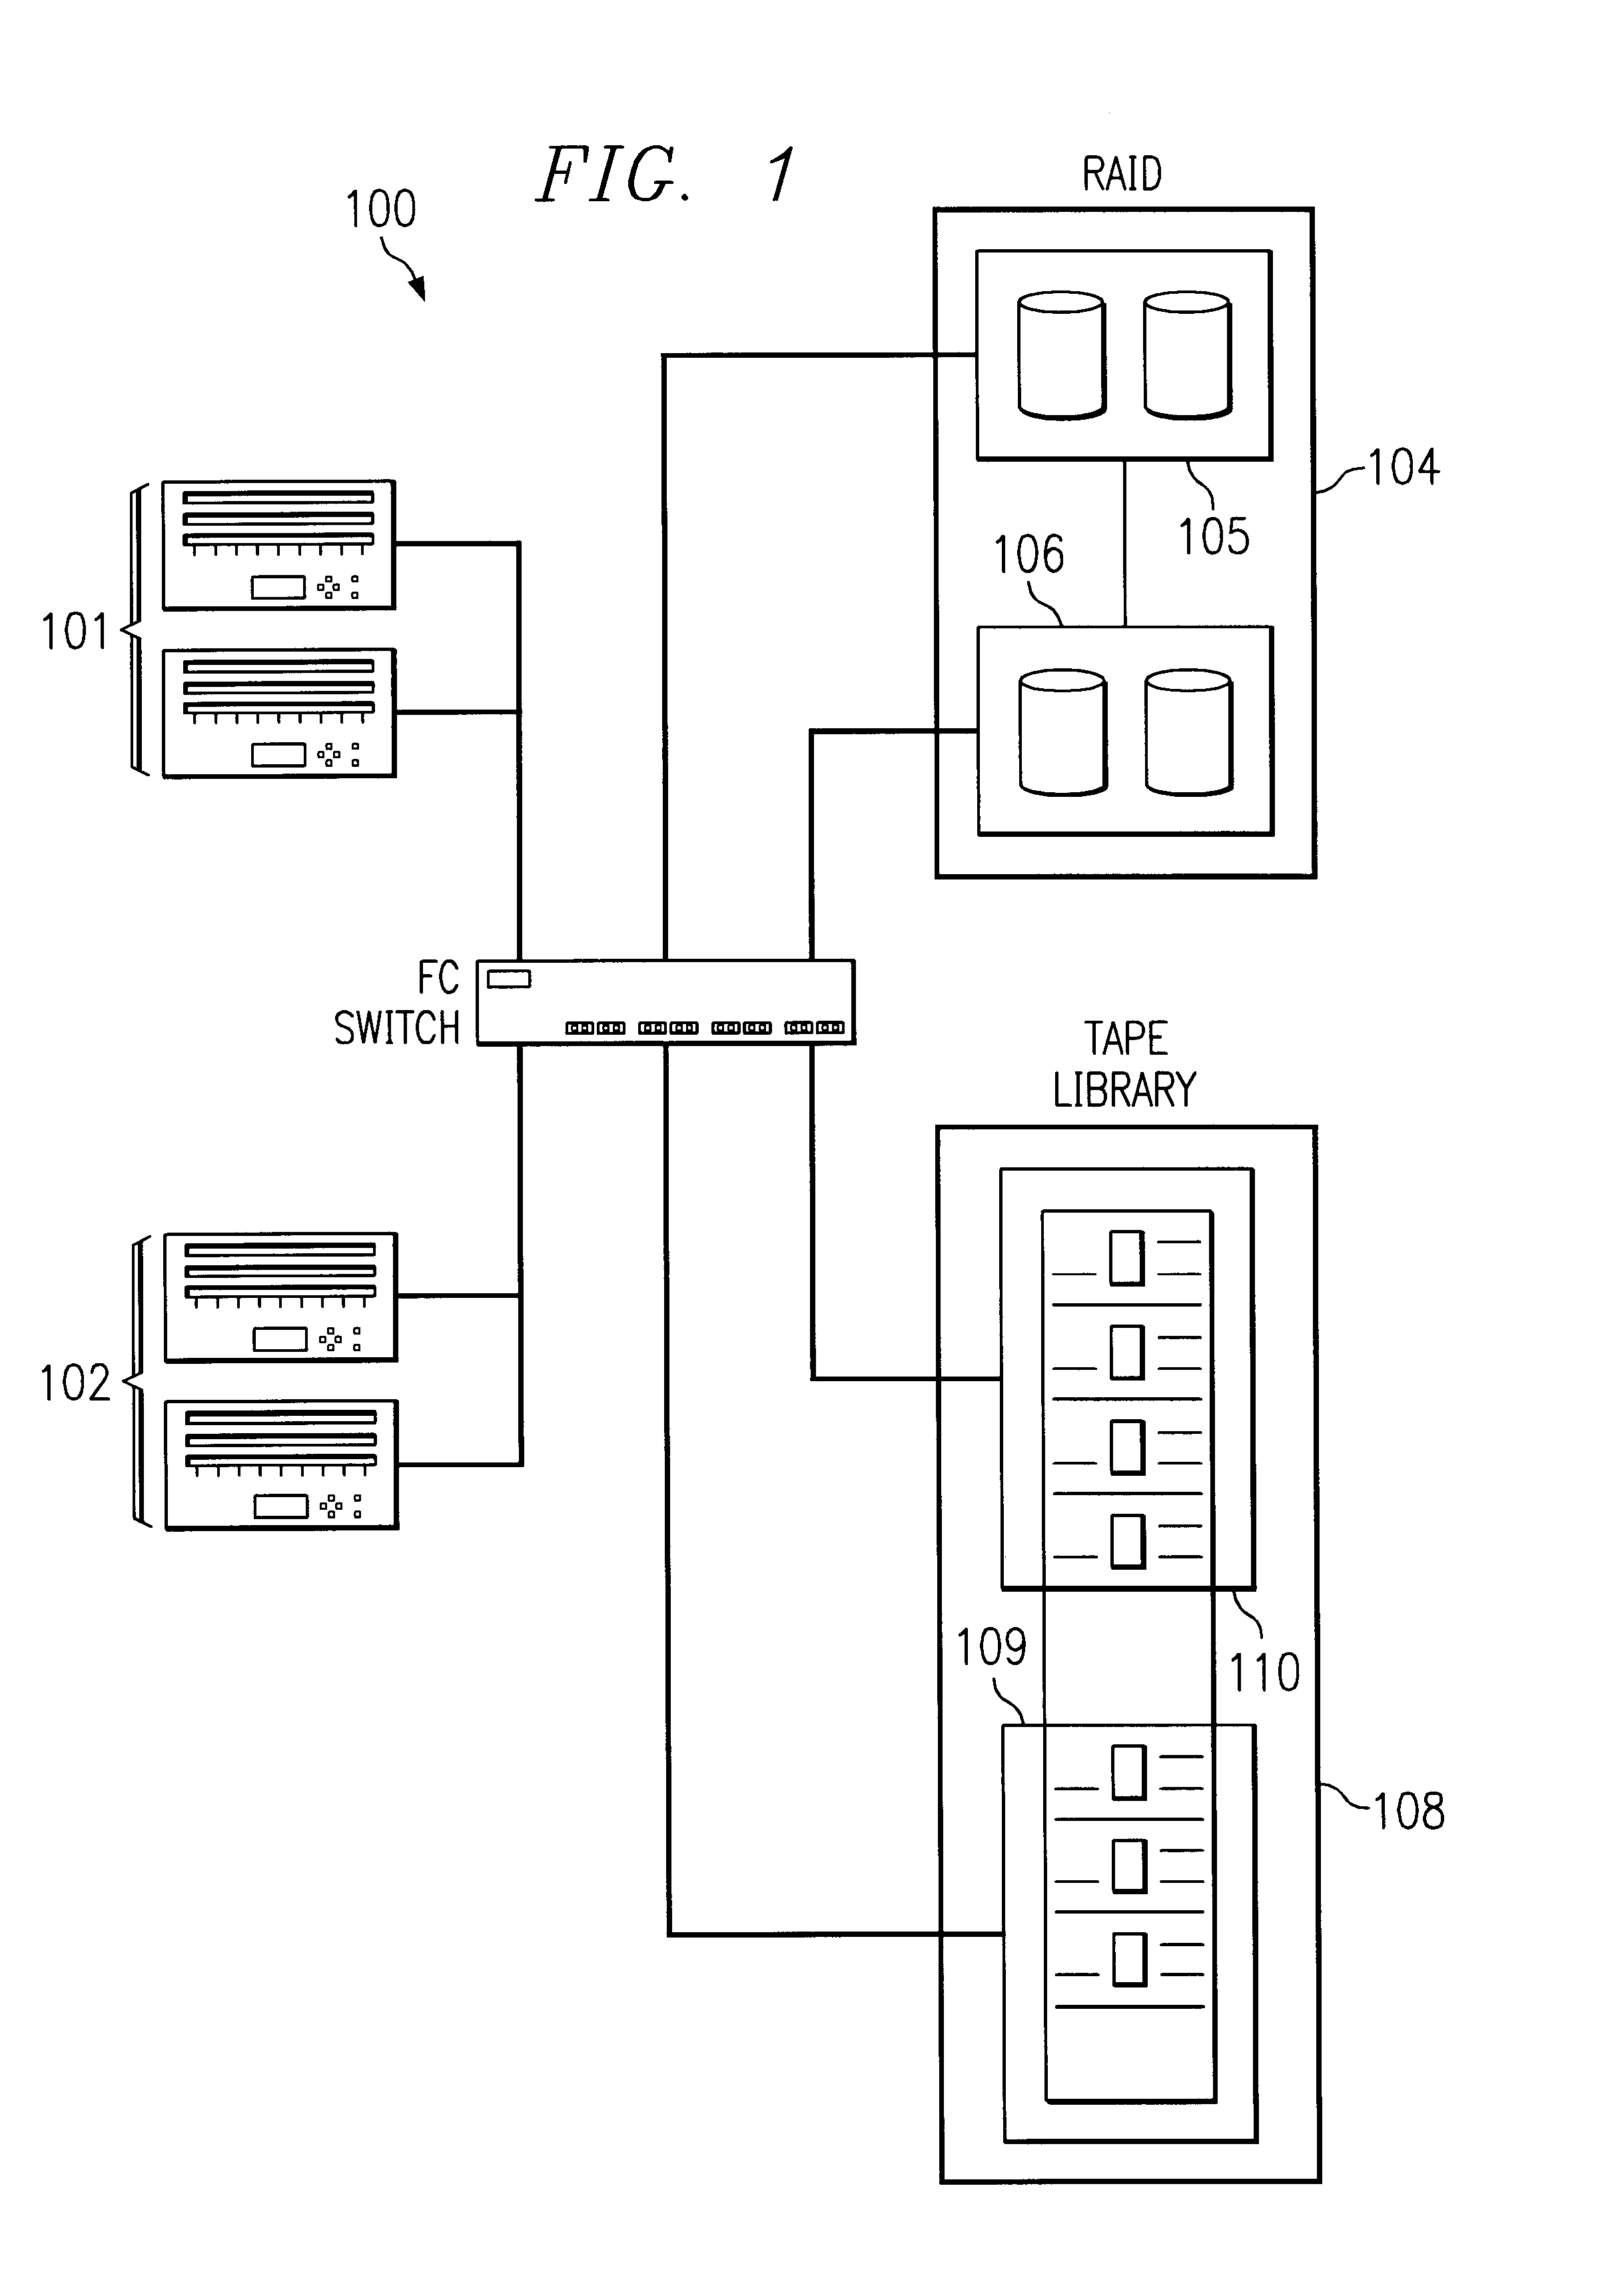 System and method for partitioning a storage area network associated data library employing element addresses